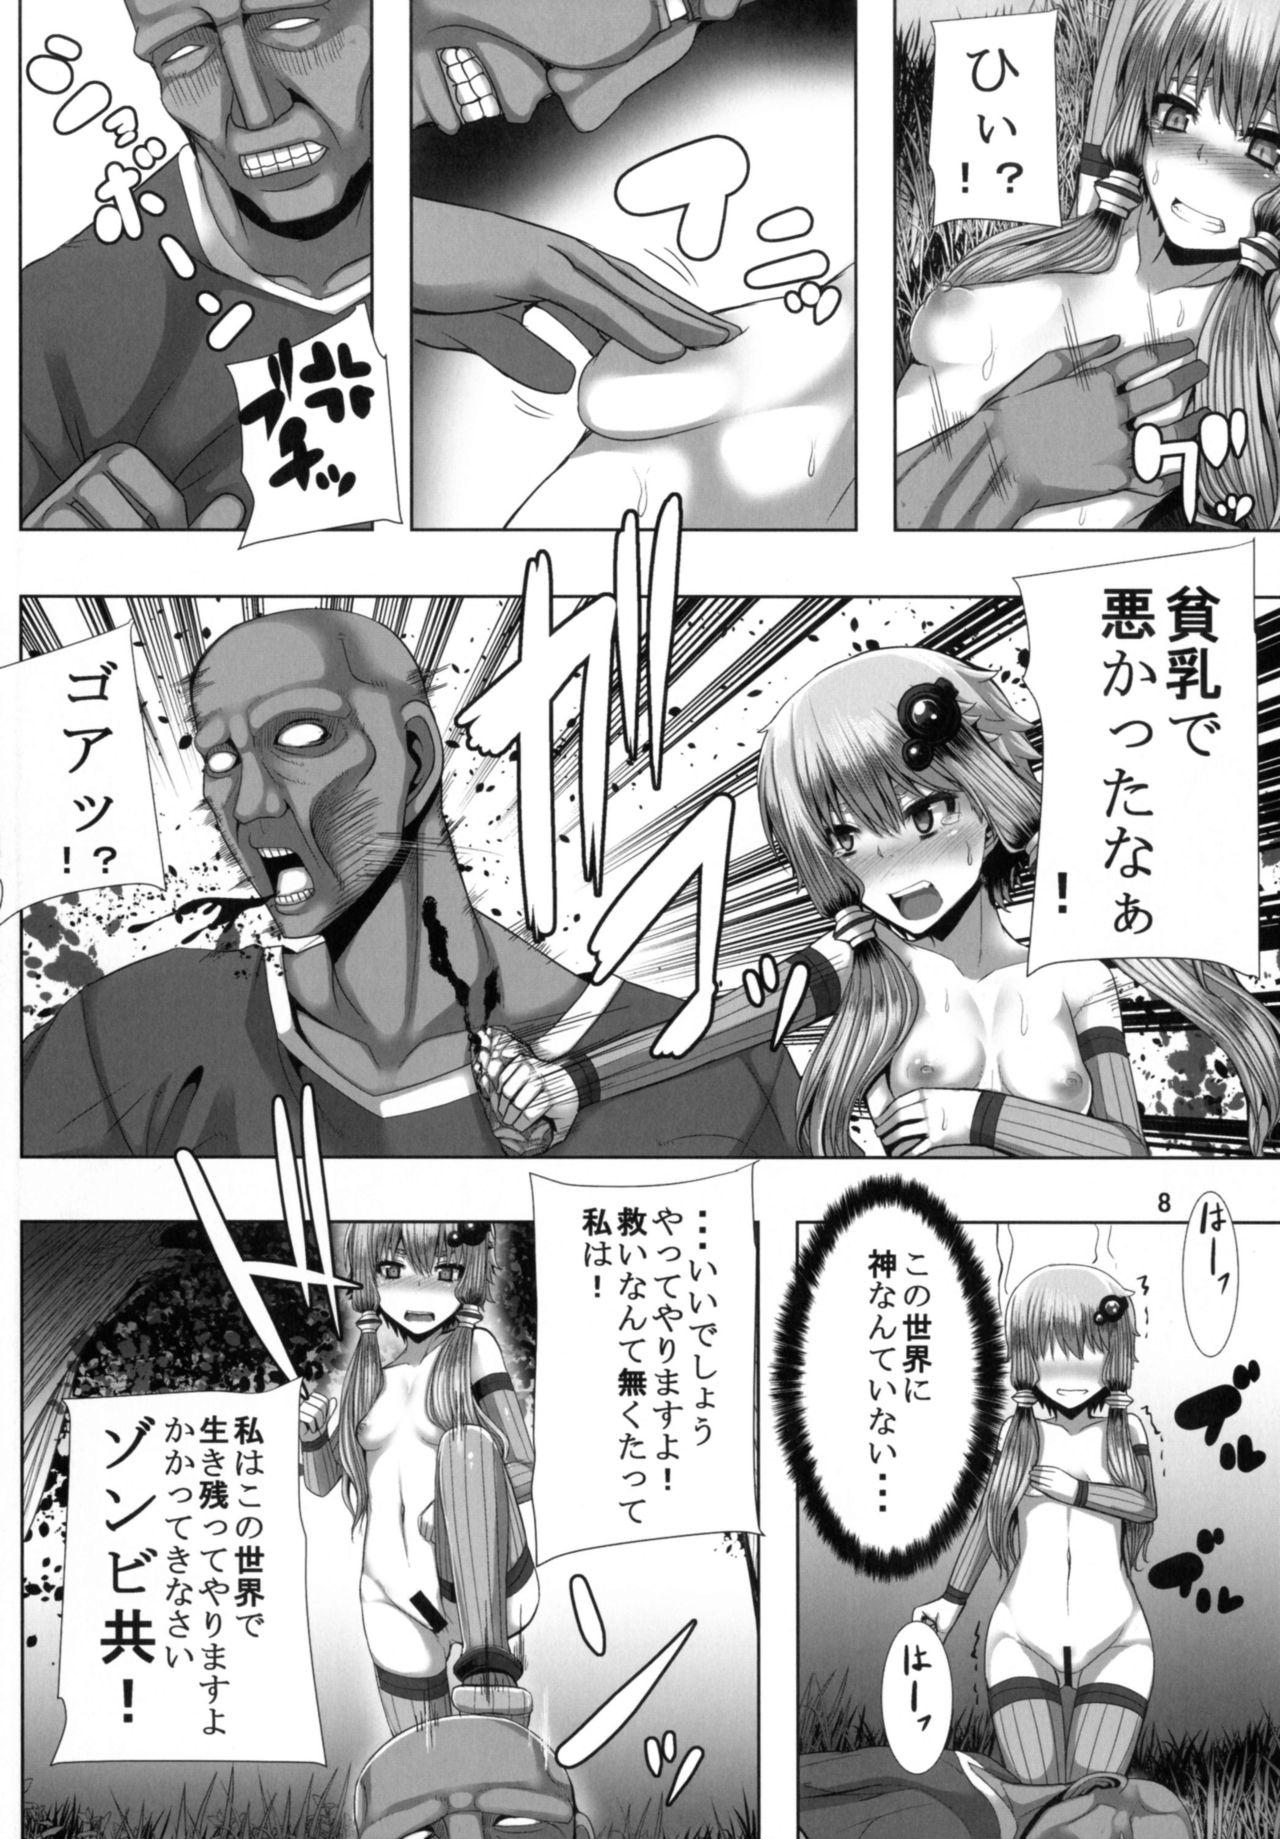 Chica YUKARI OF THE DEAD - Vocaloid Voiceroid Mom - Page 8